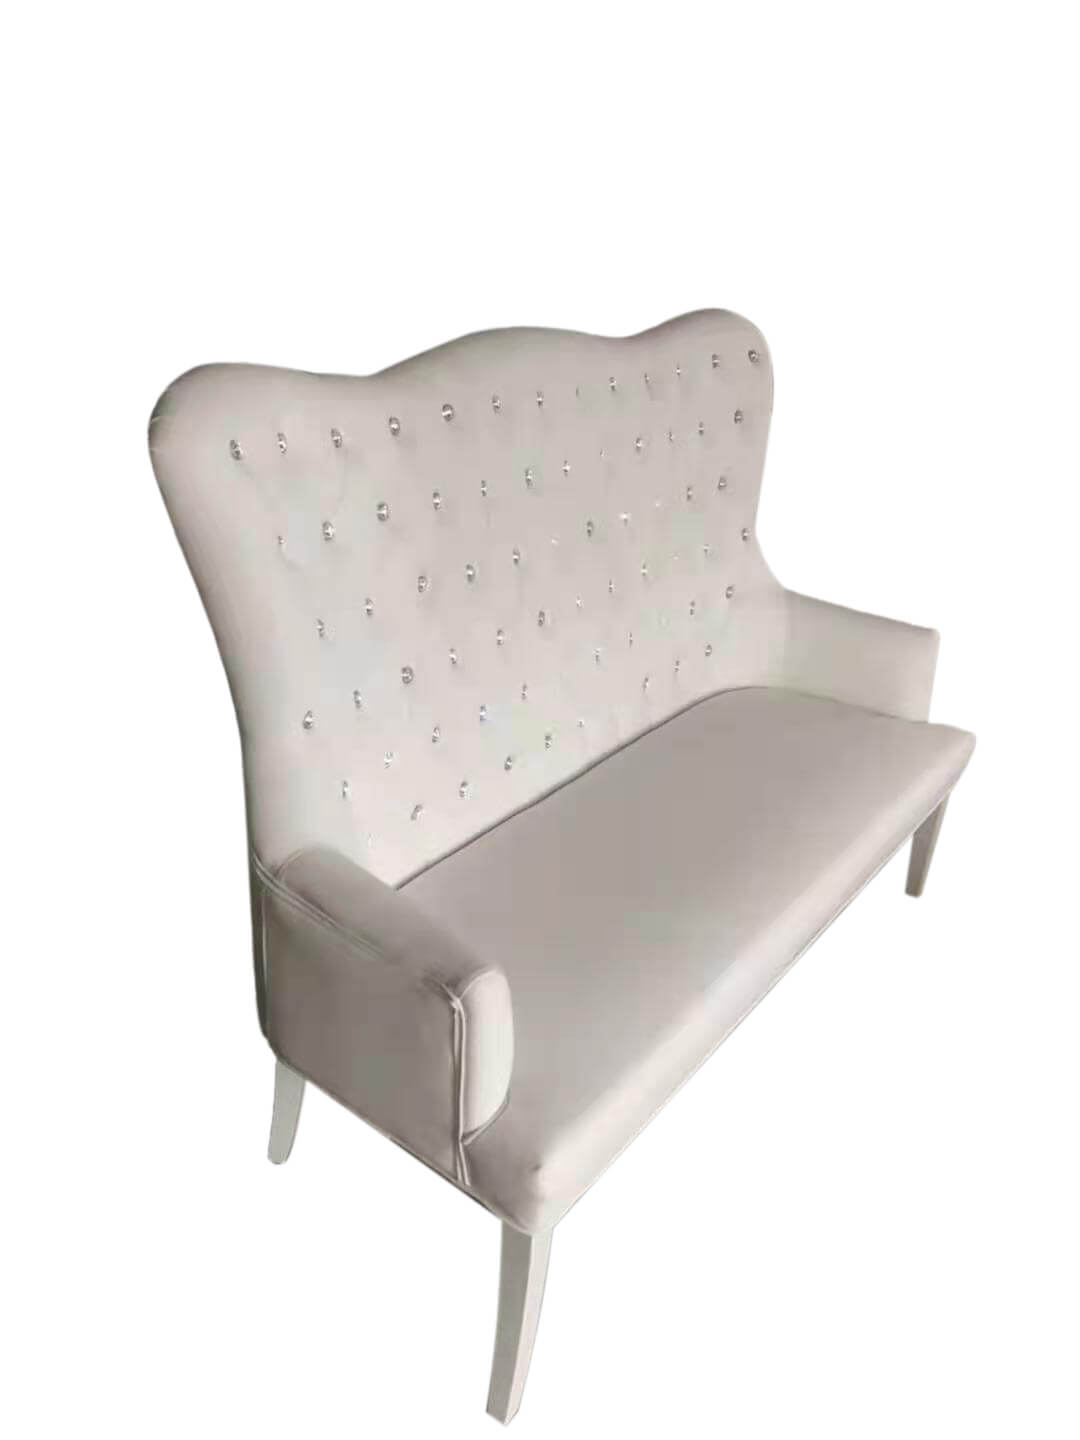 Wooden Royal Throne Chairs Wholesale